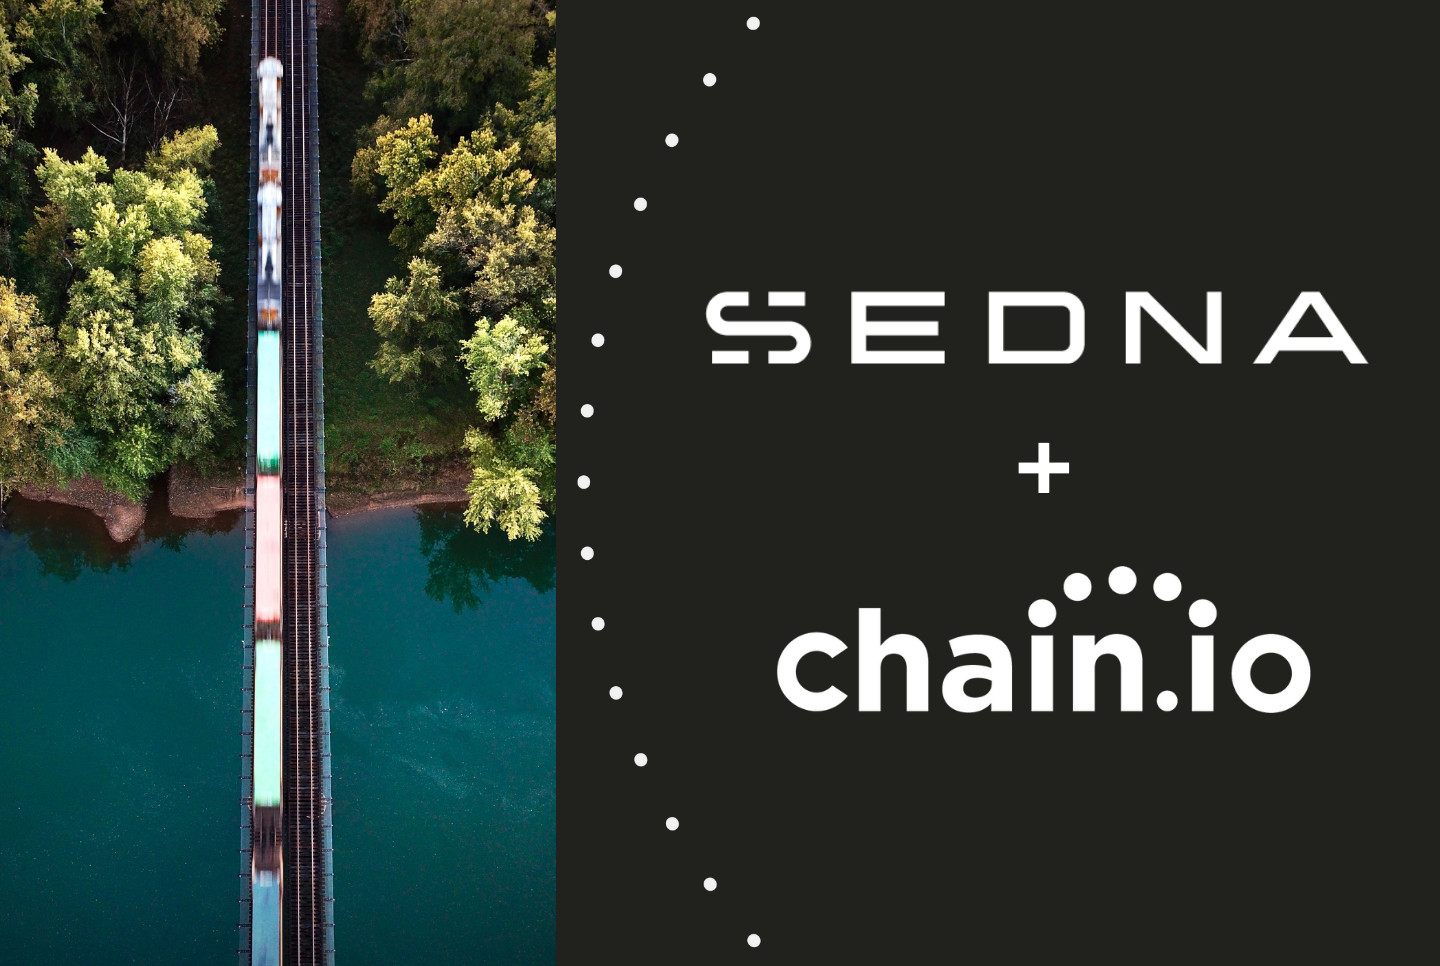 SEDNA expands to reach new users through Chain.io, bringing the power to leverage inbound and outbound communication in sophisticated collaboration platform